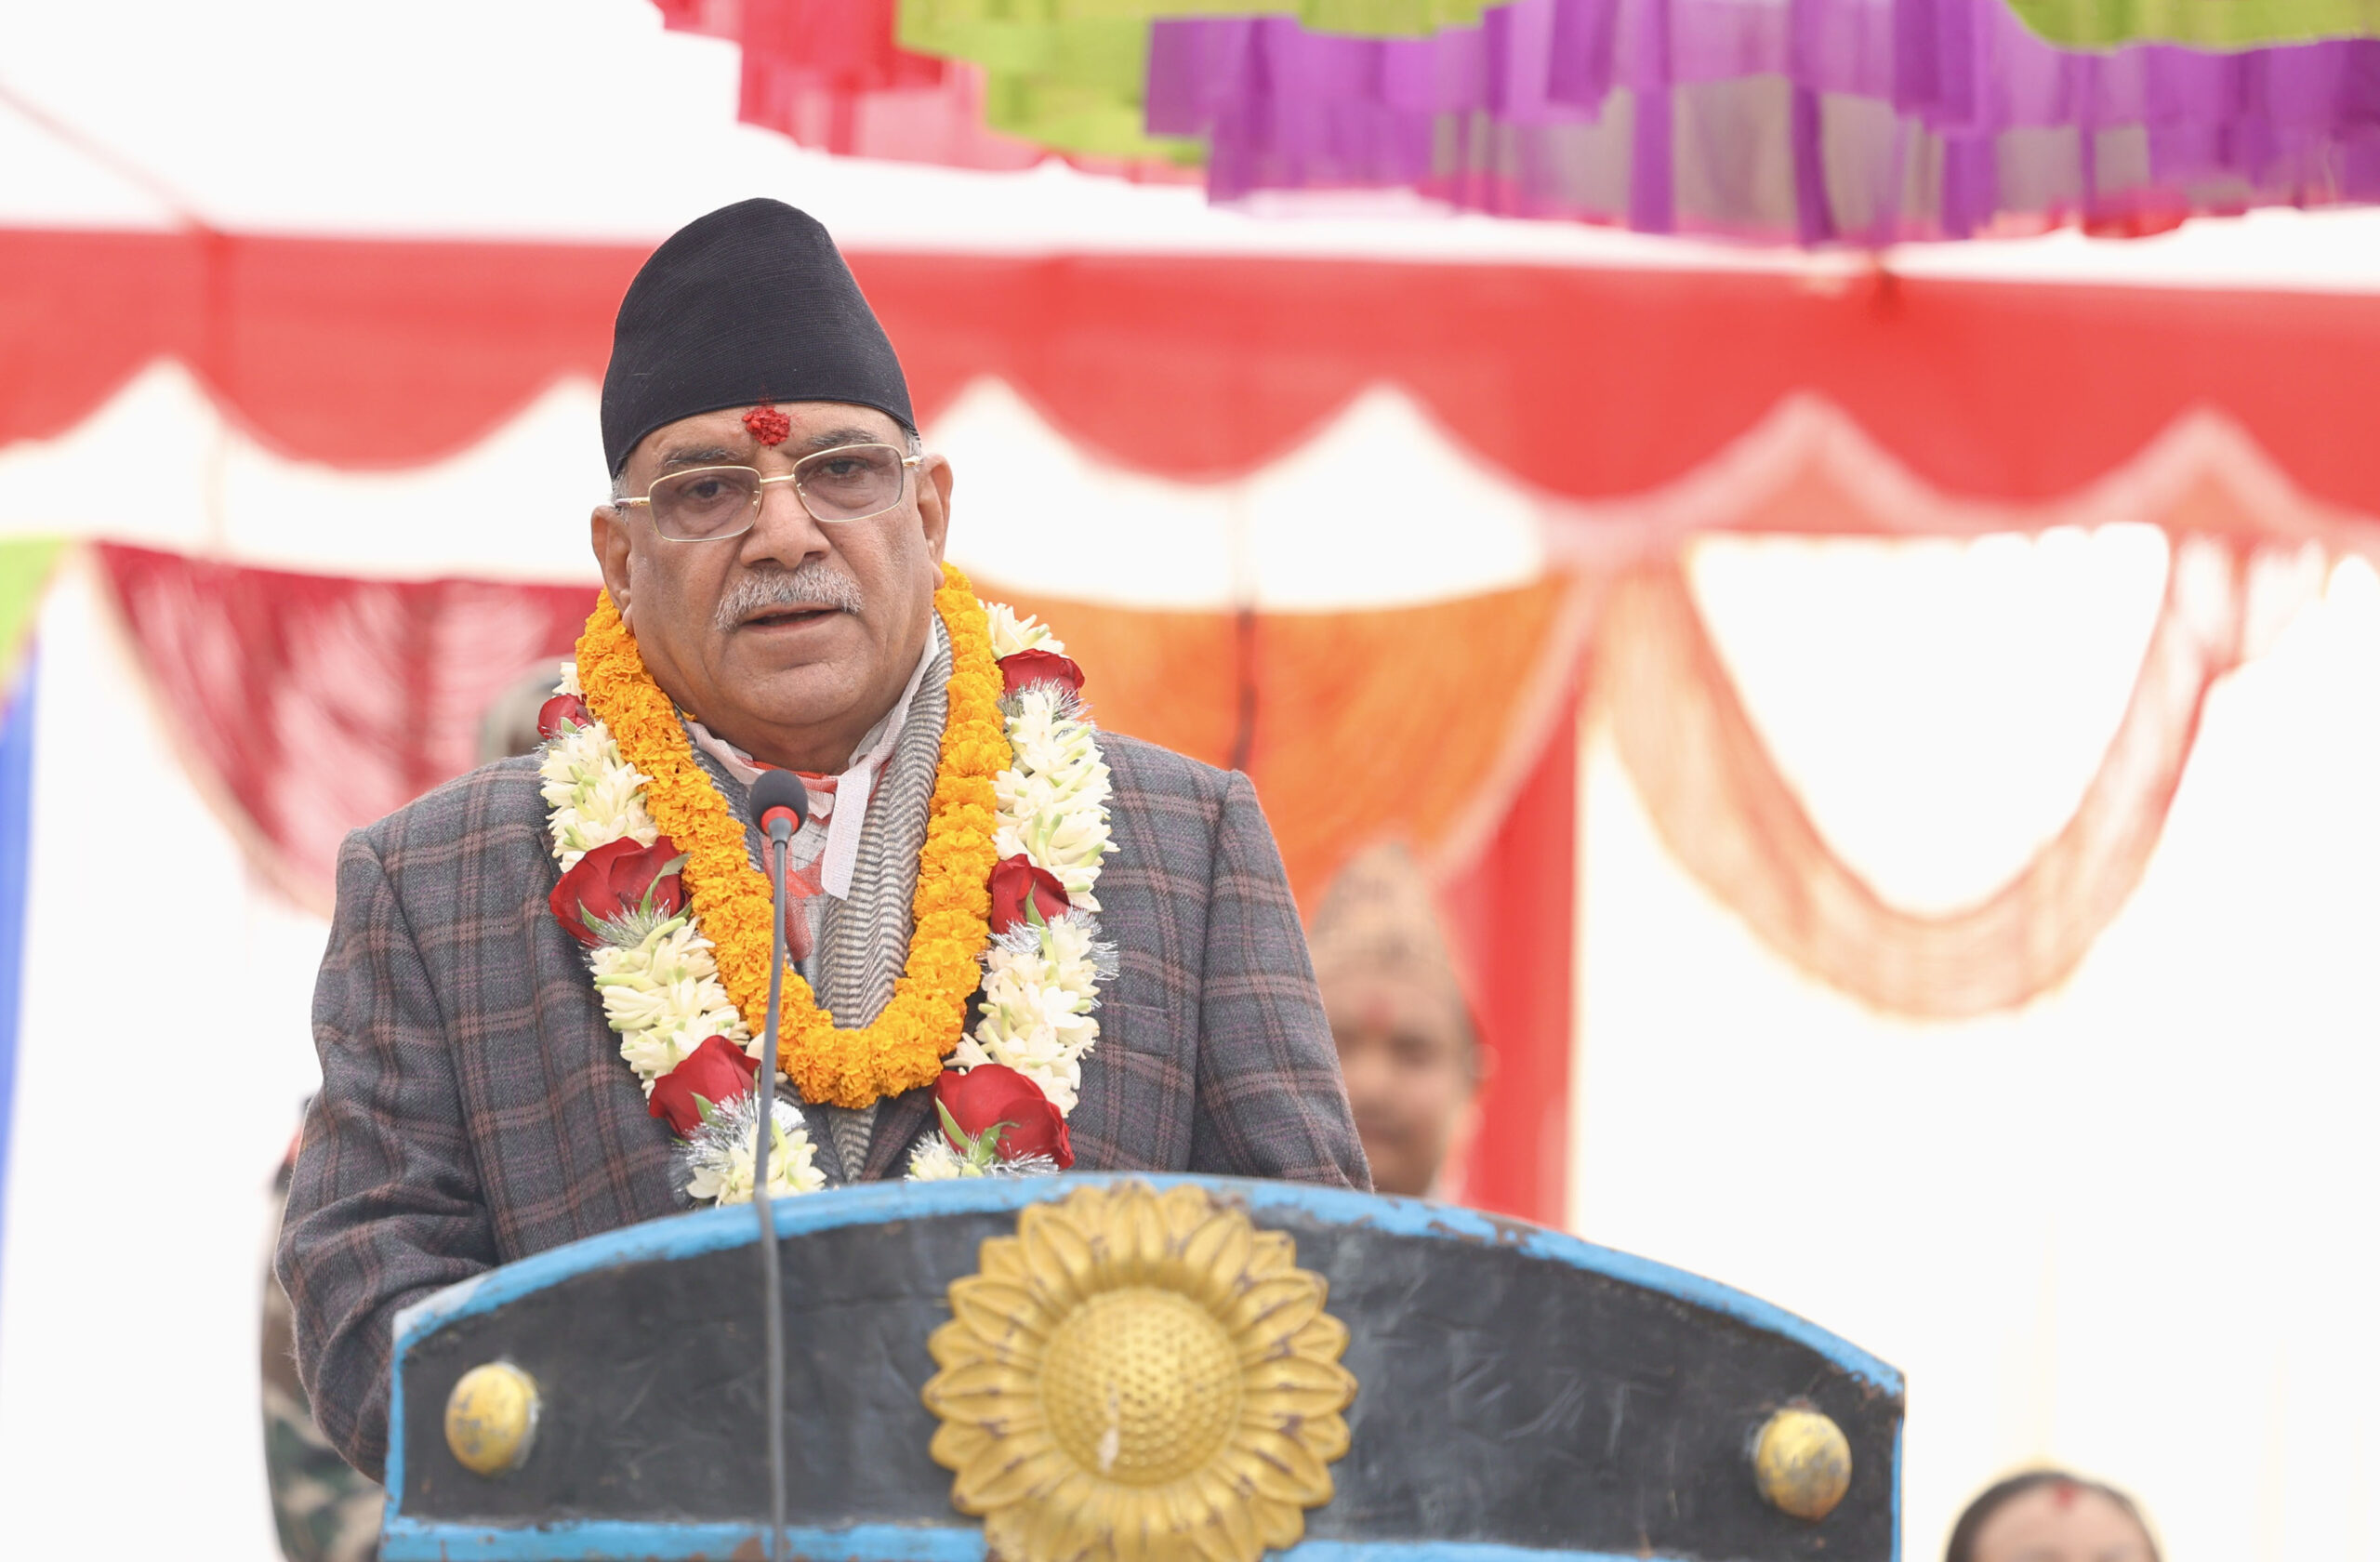 PM Dahal emphasizes the role of multi-cultural democracy in strengthening national unity